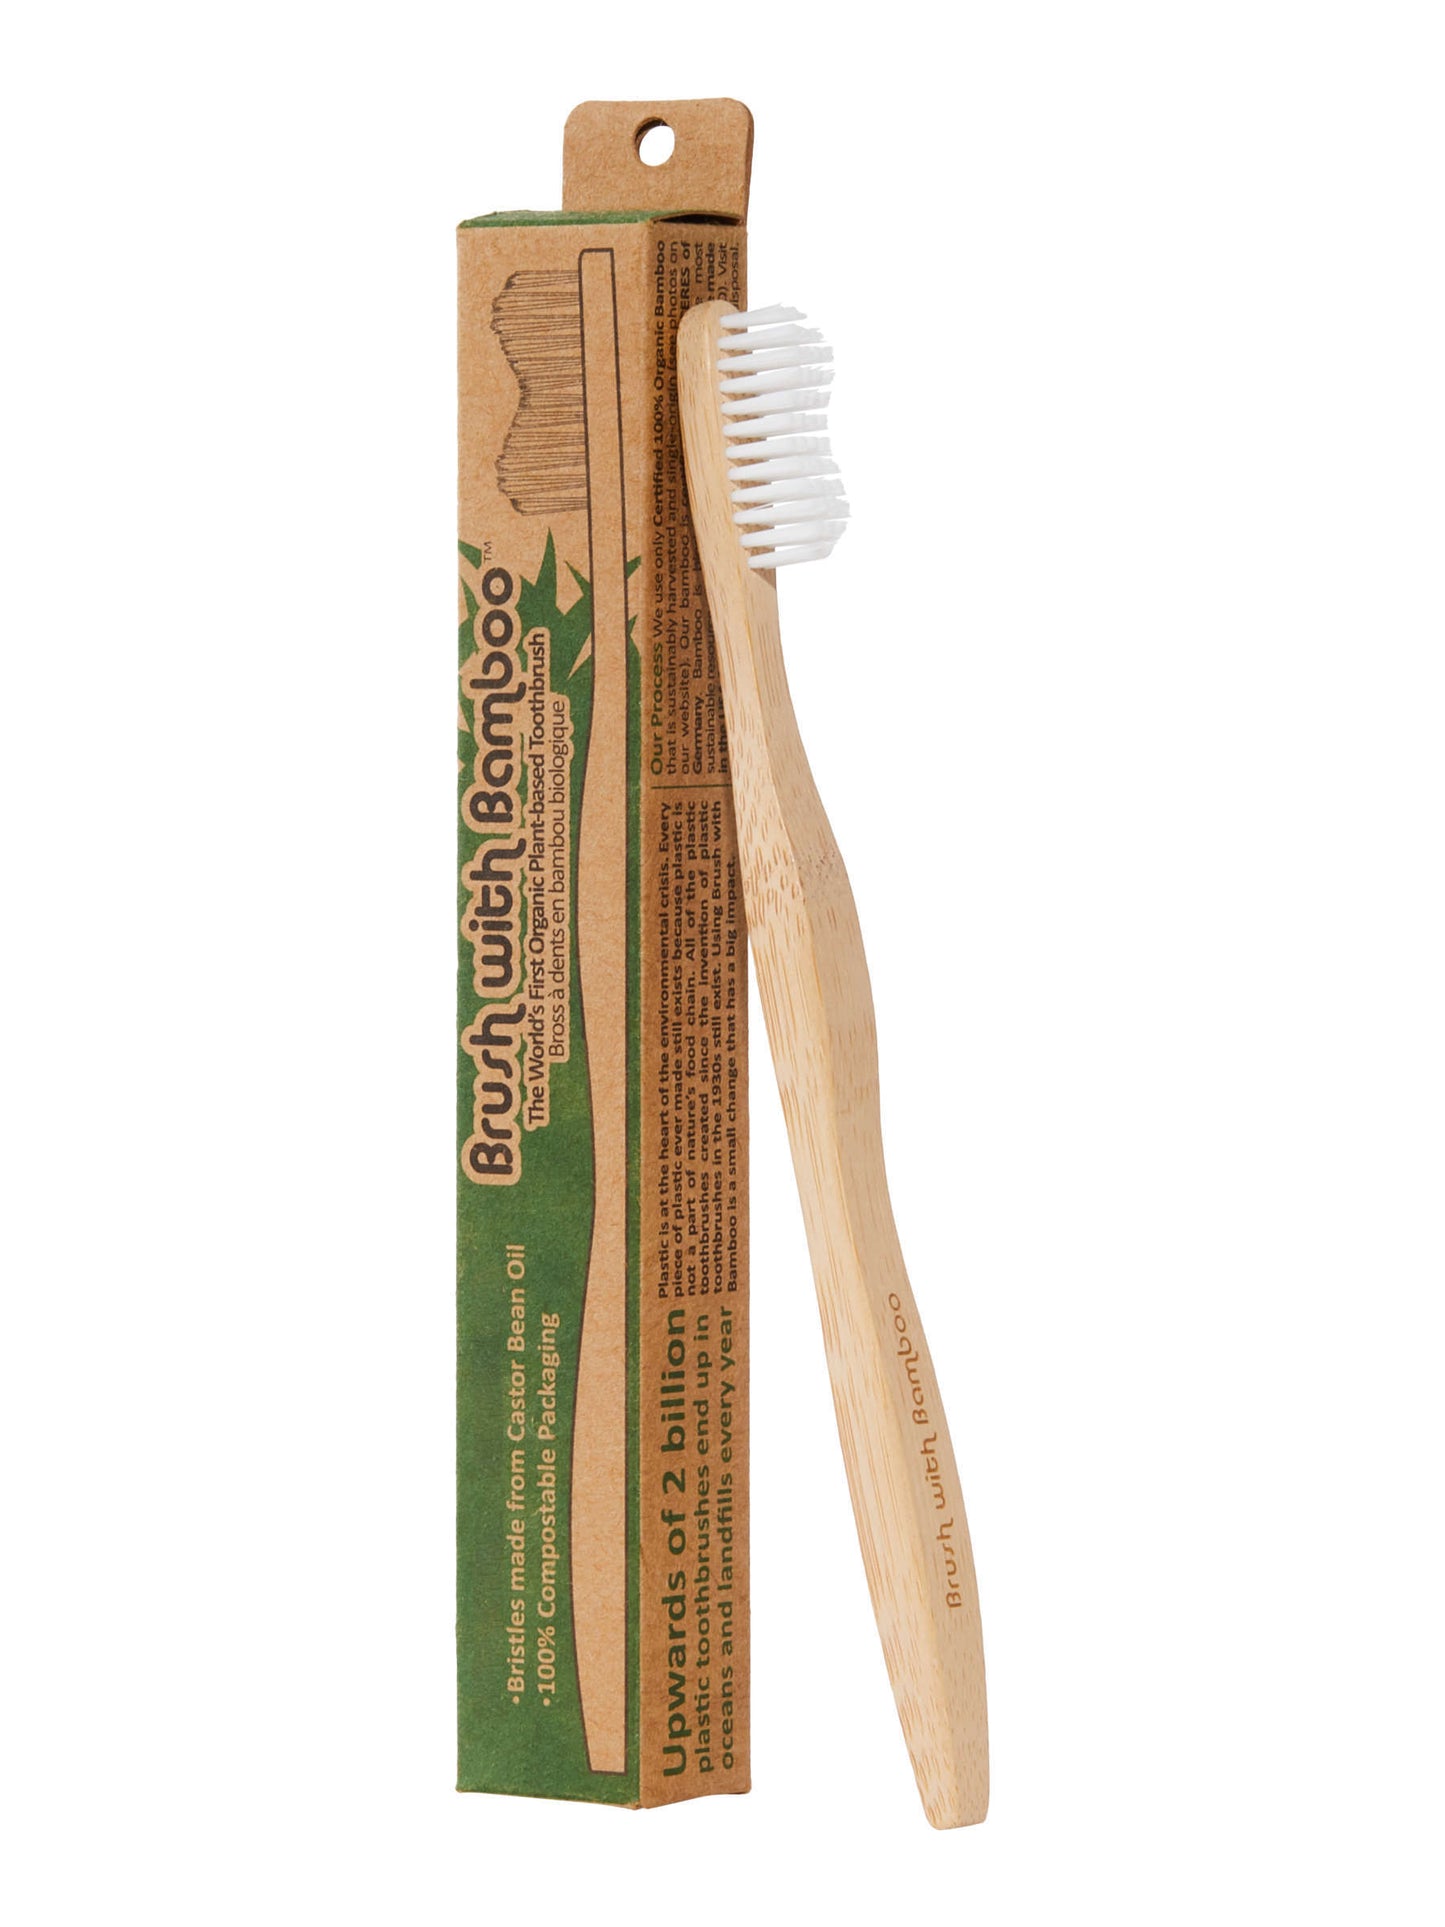 Bamboo Toothbrush - Adult, Standard Soft